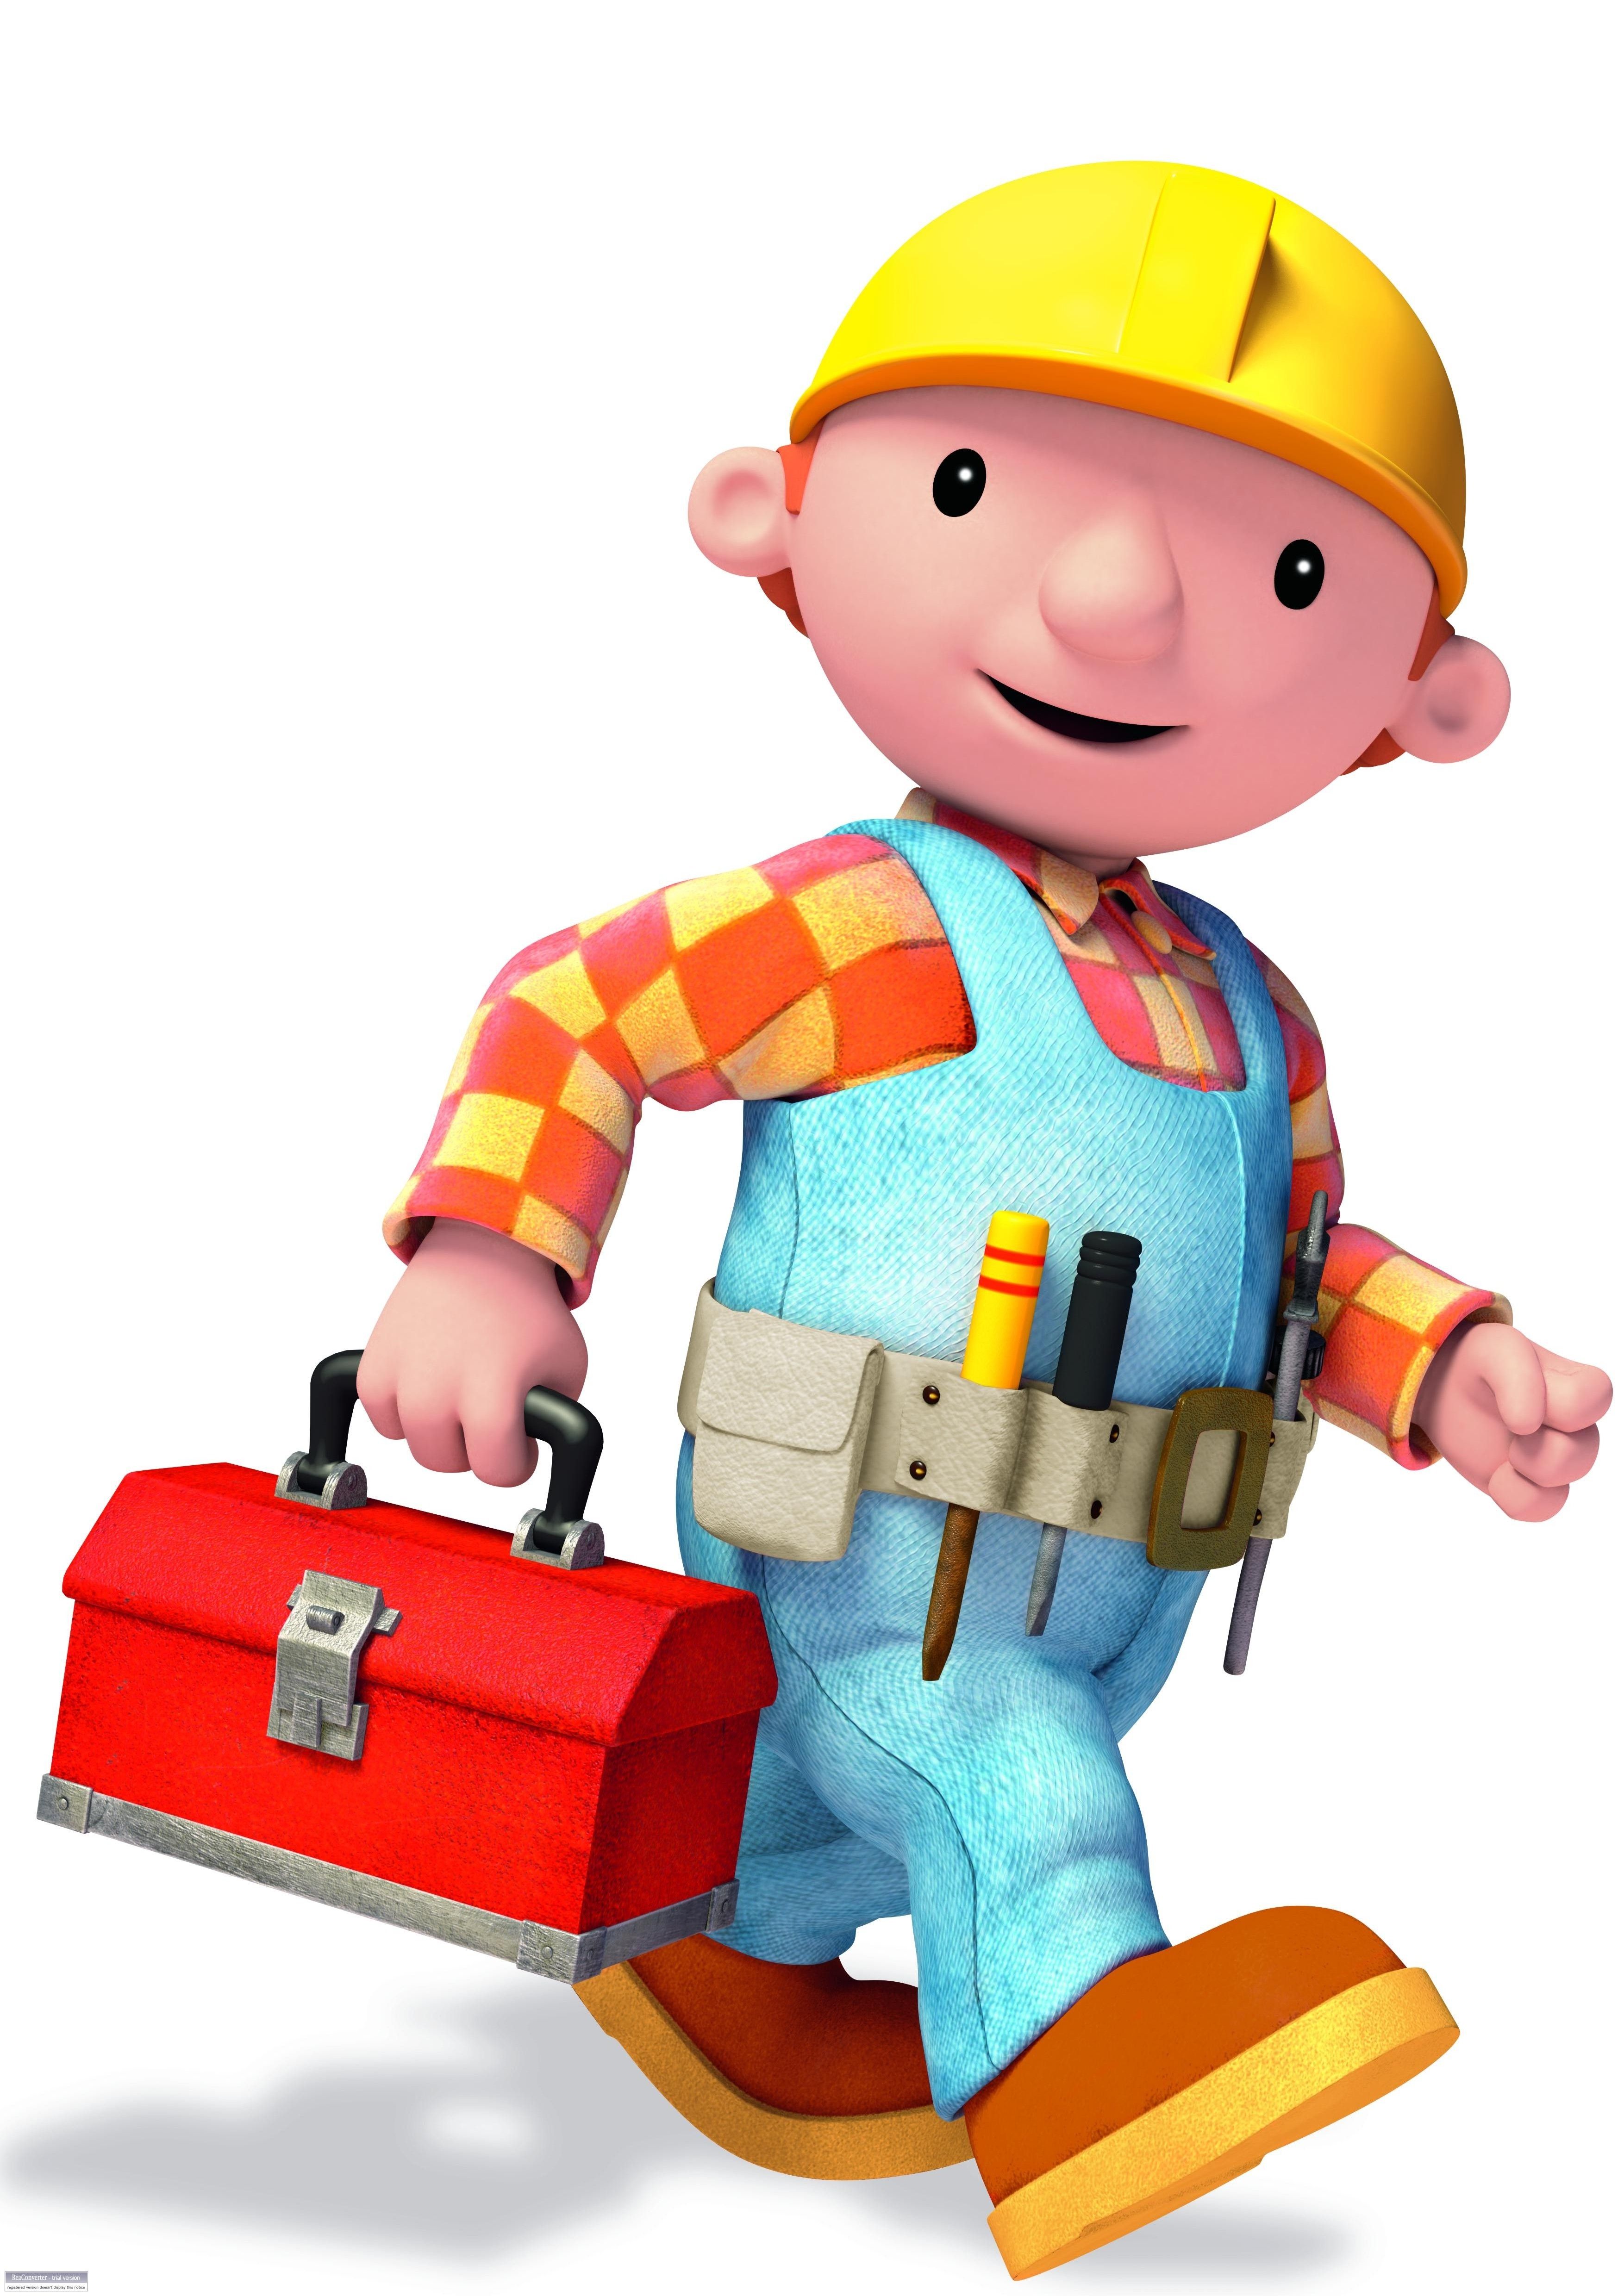 Bob The Builder Characters / Bob the Builder / Characters - TV Tropes